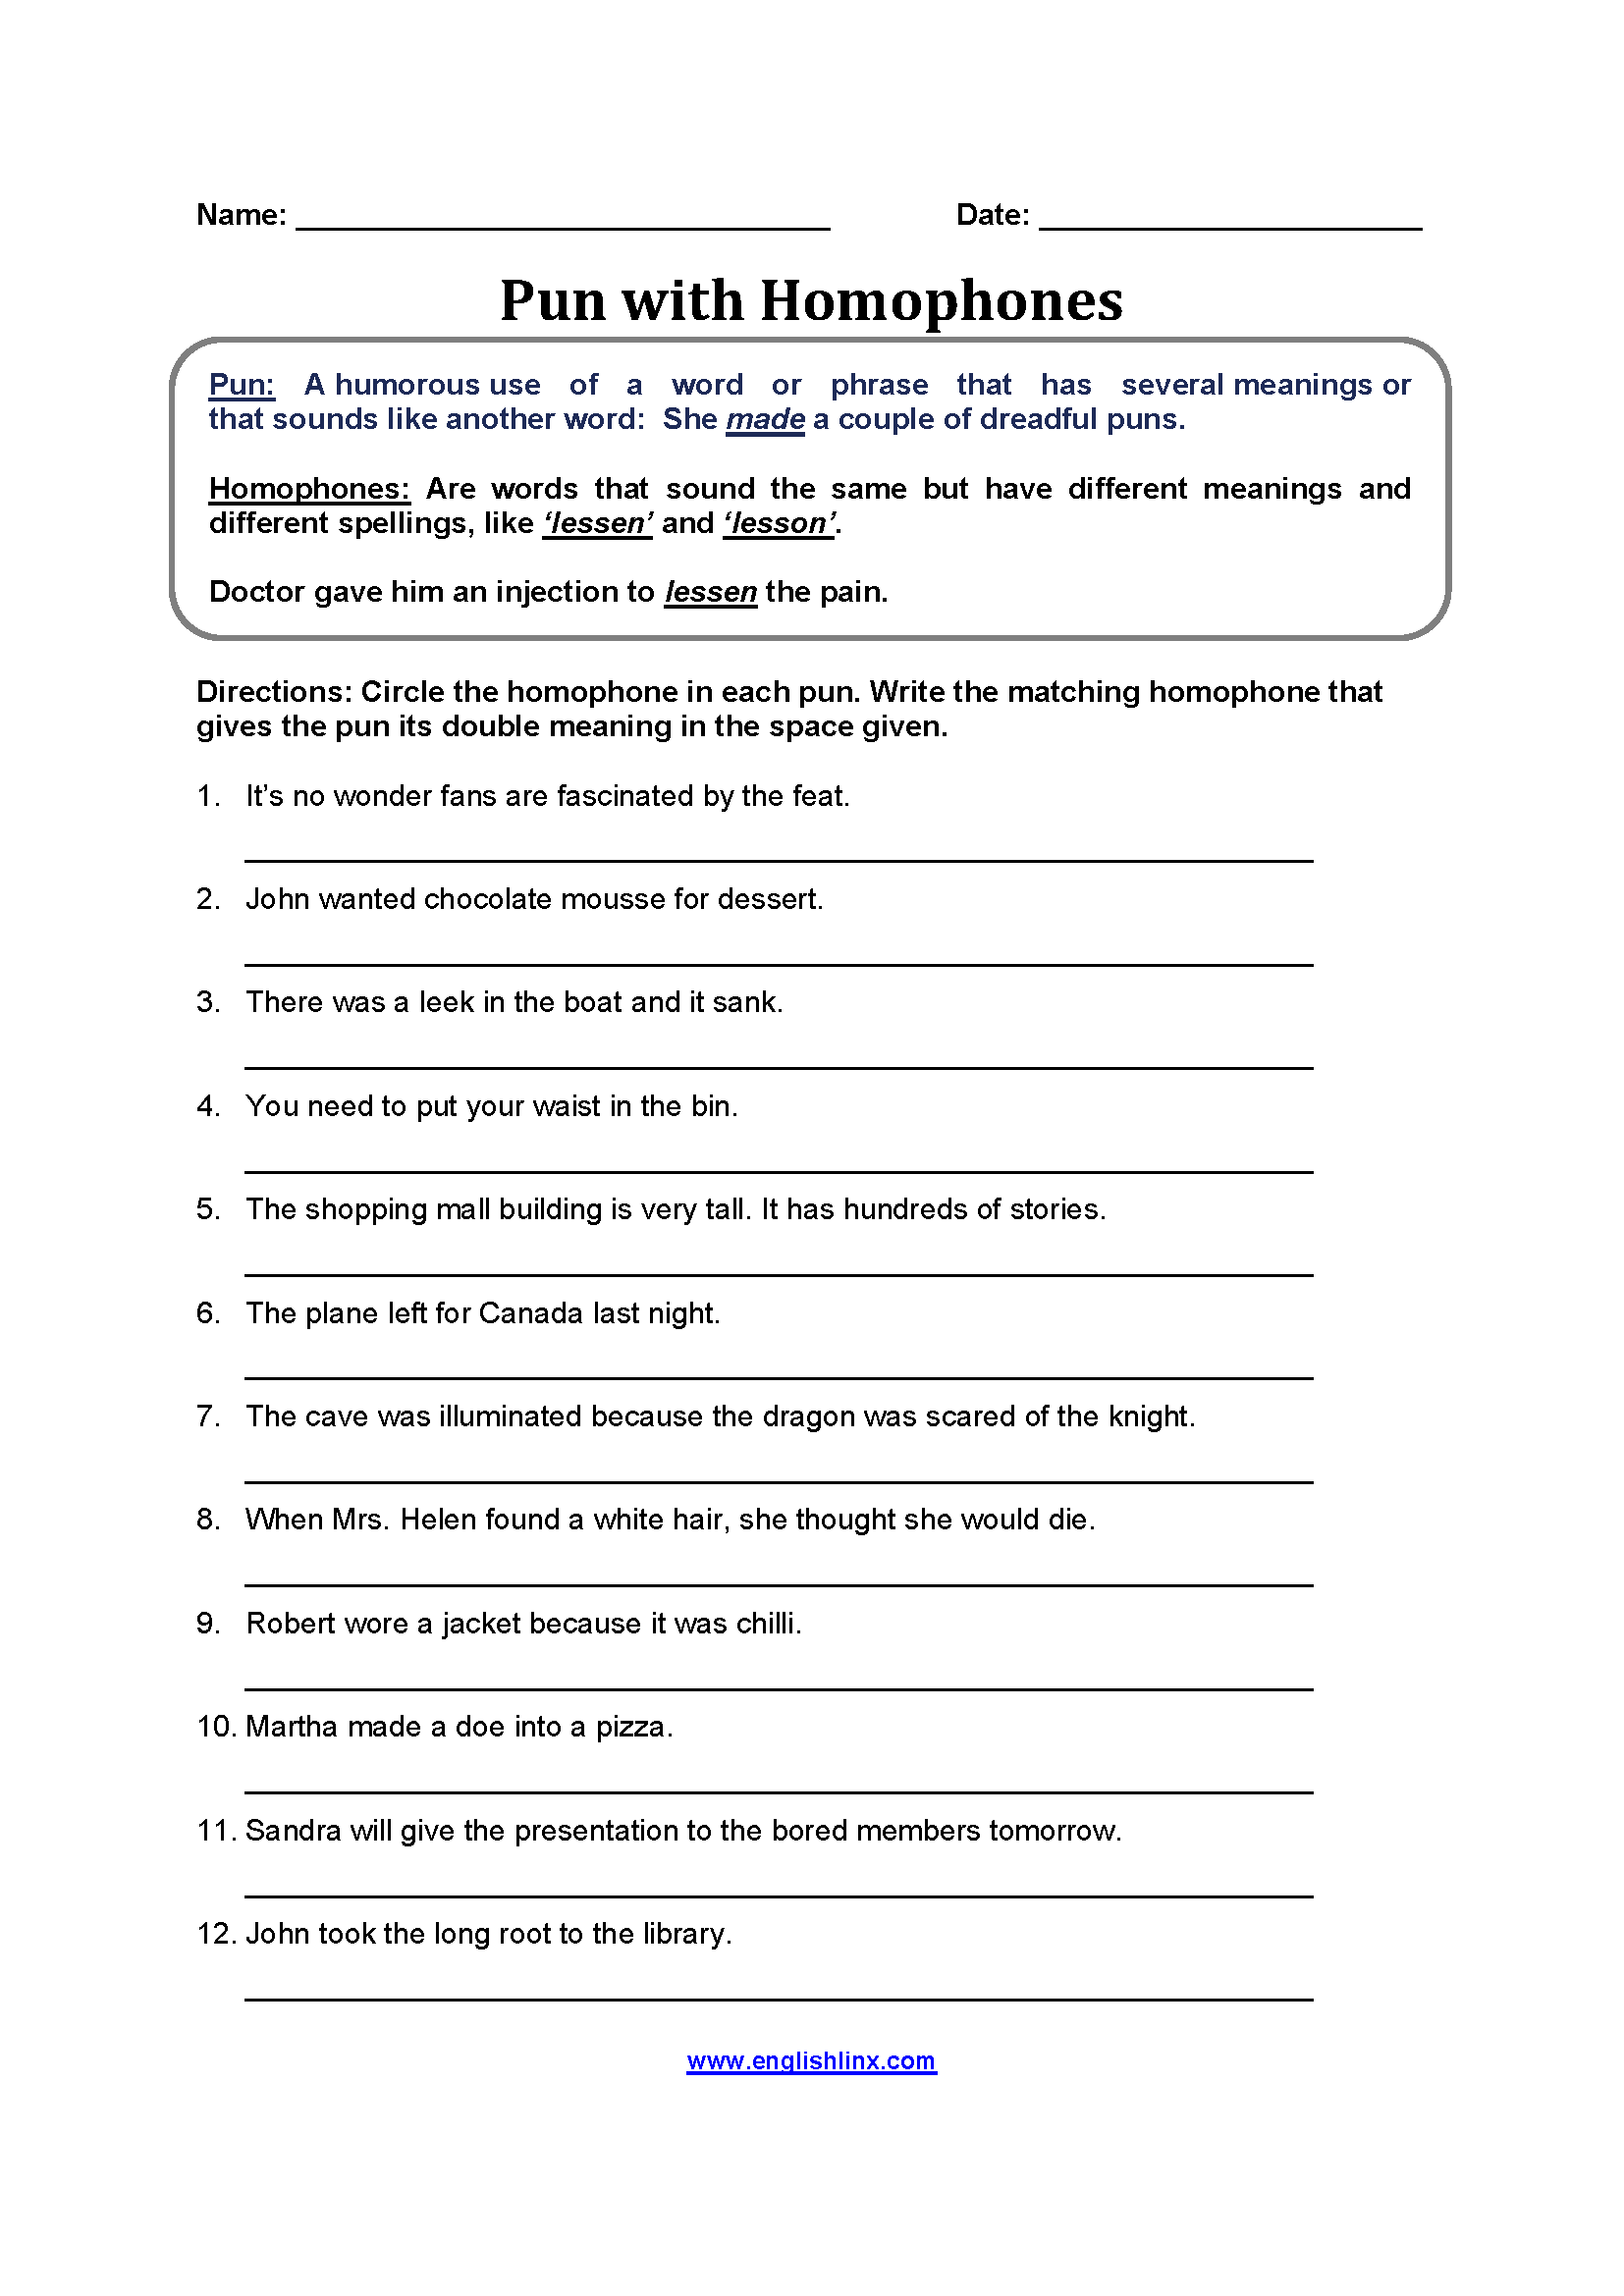 Pun with Homophones Worksheets